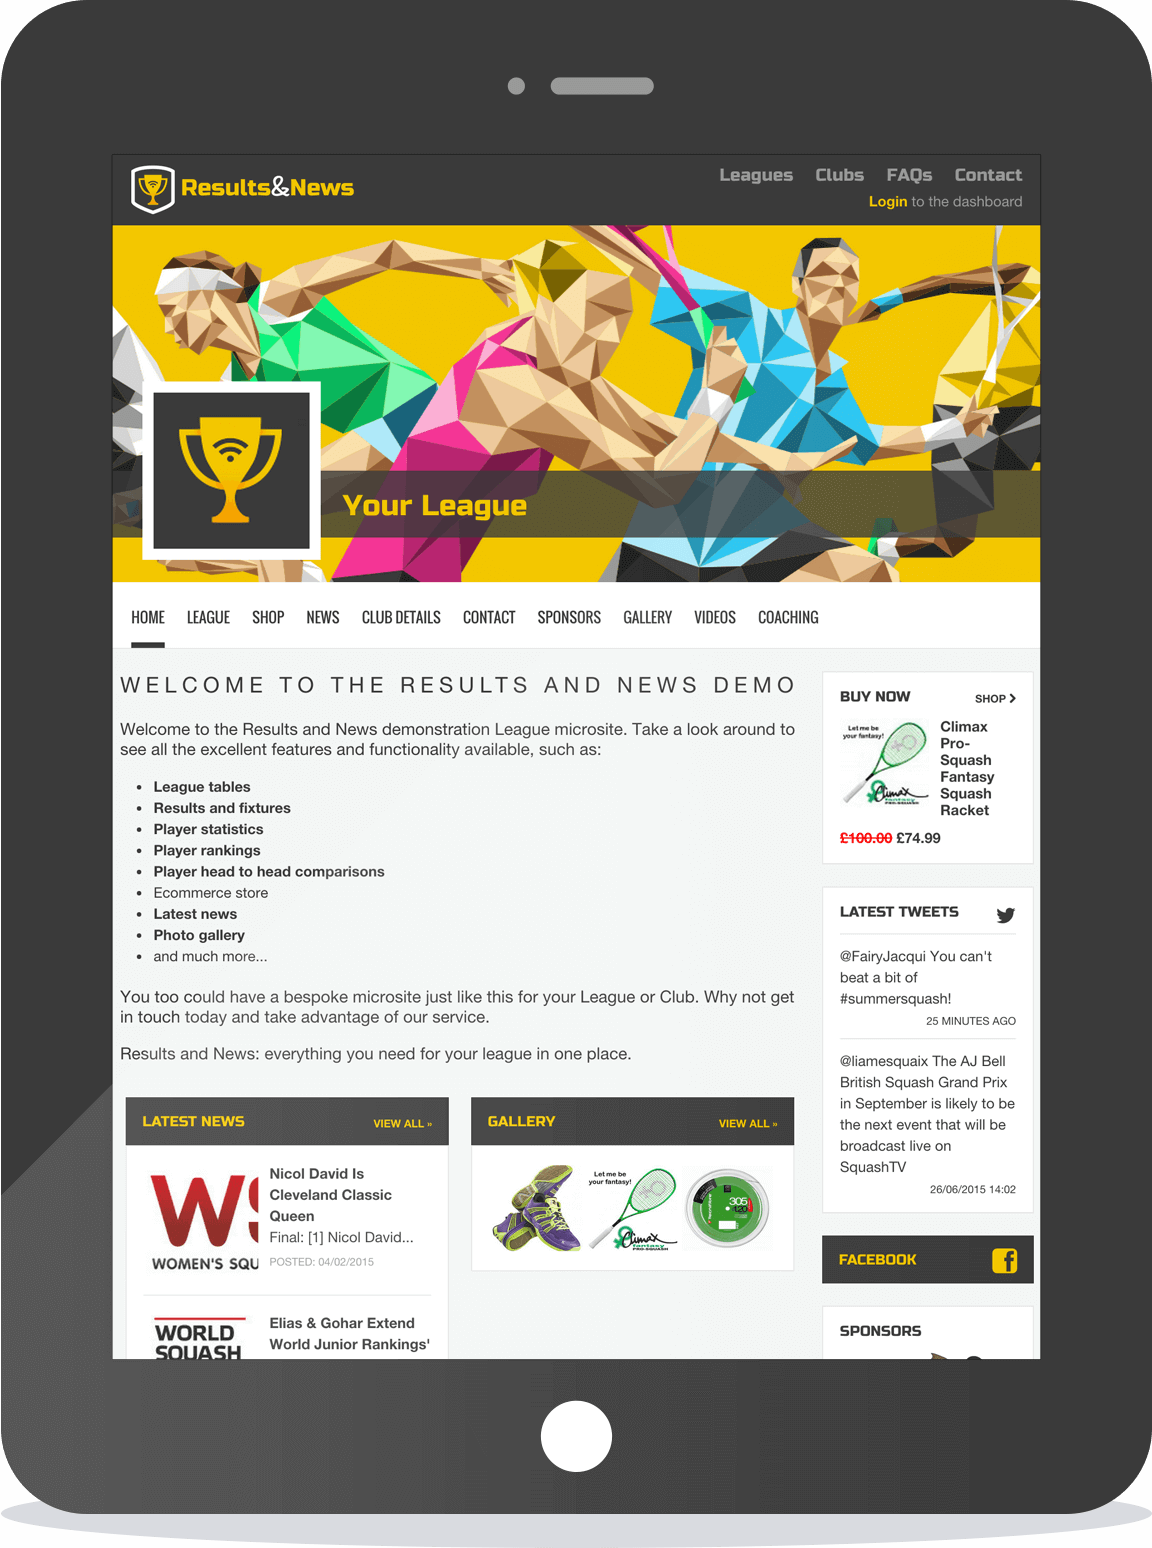 Build bespoke microsites for your league